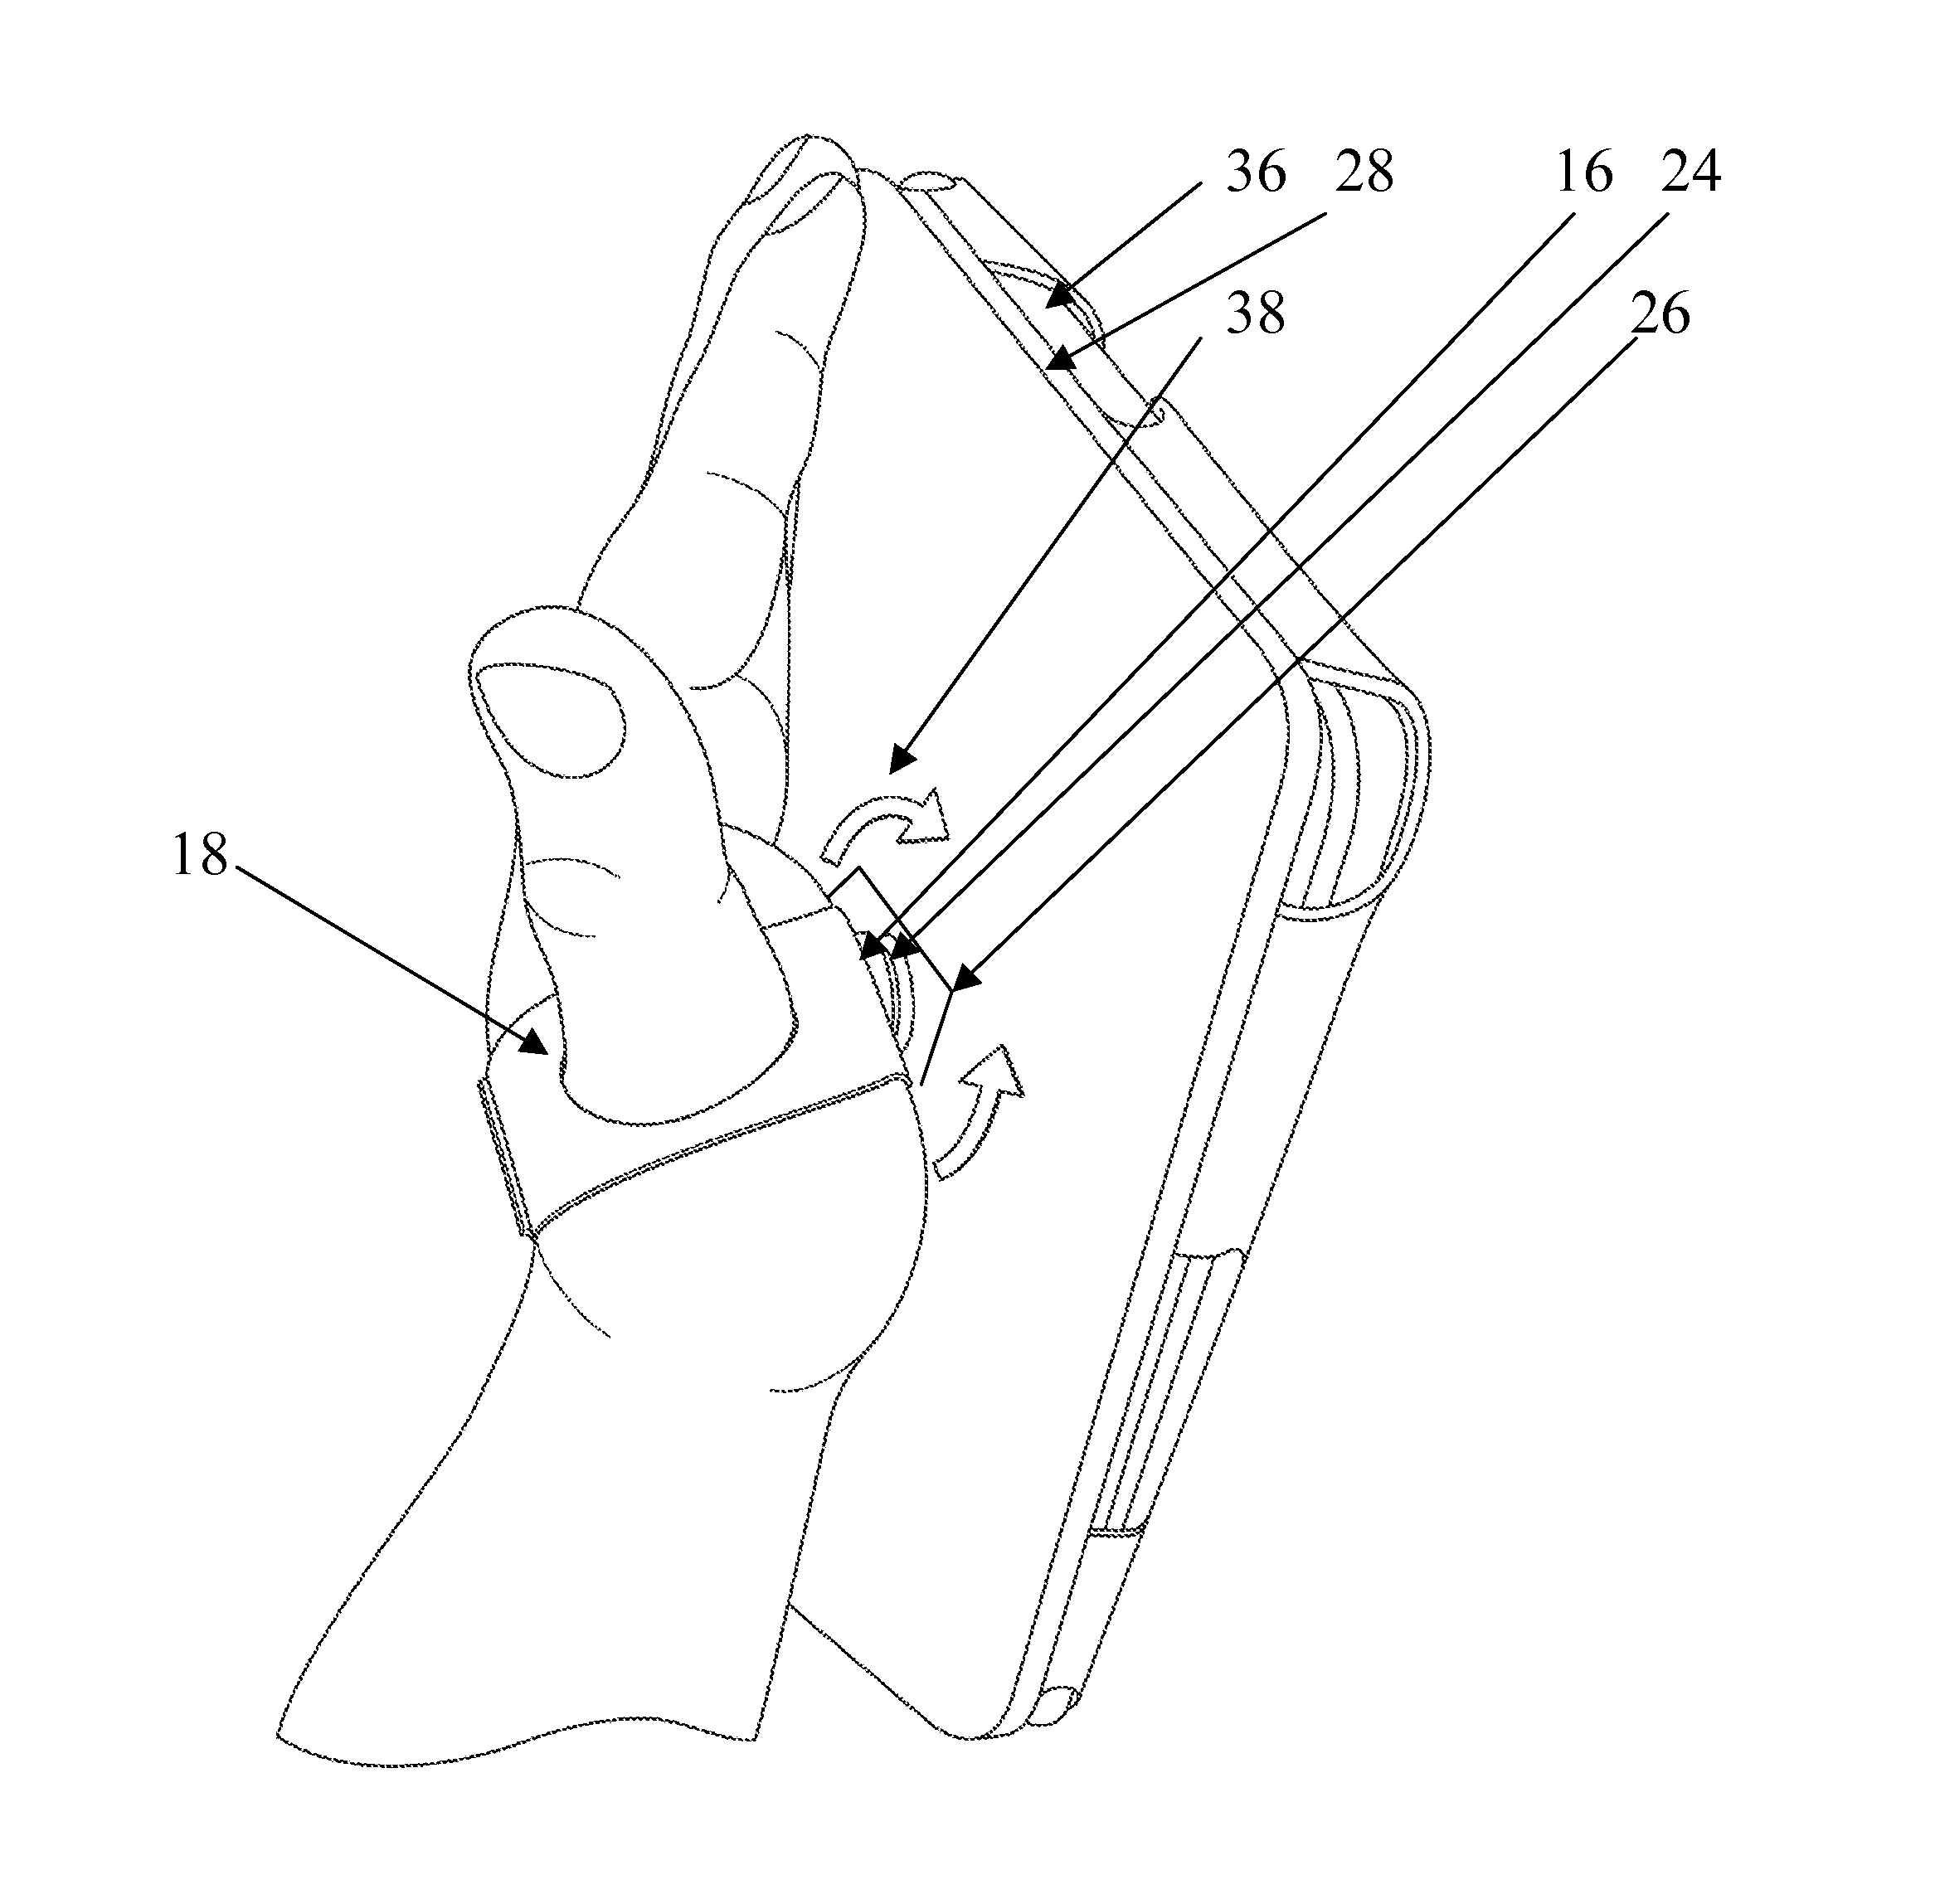 Carrying aid equipped with thumbhole and button snap fastener to permit transporting and swiveling of a portable touch screen device